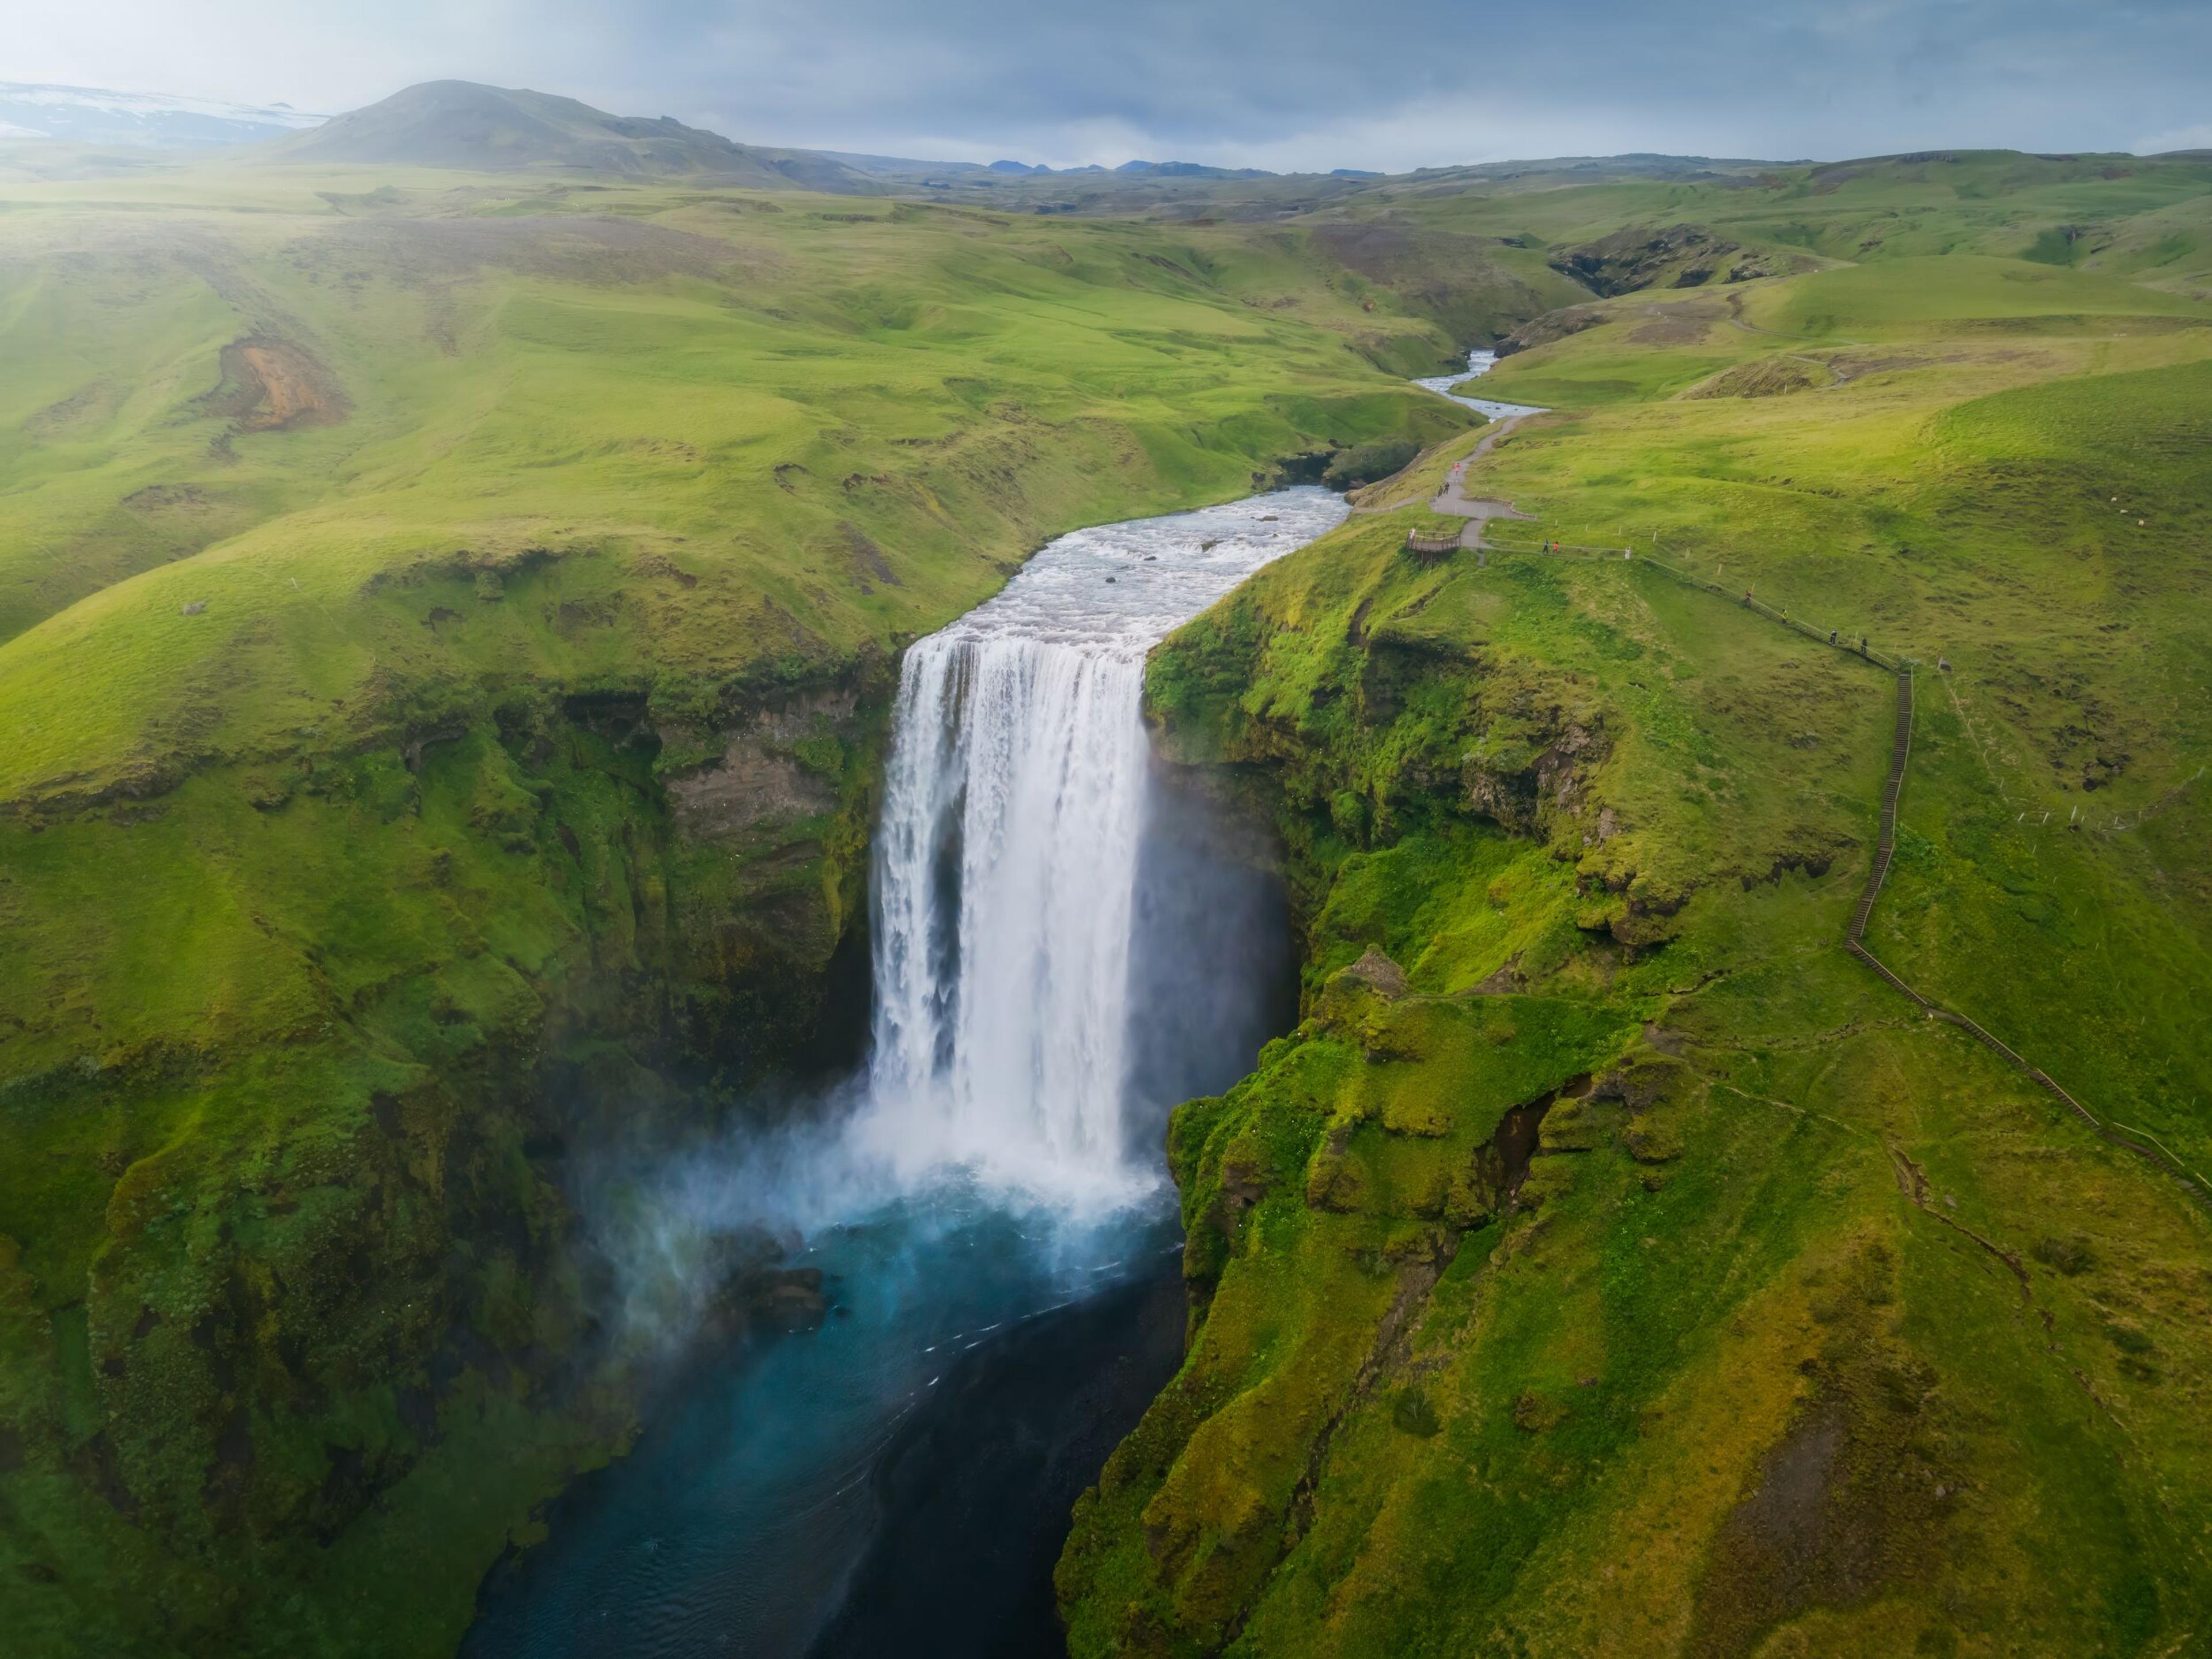 An aerial view of a majestic waterfall in a lush green landscape with a river running away from the fall towards the horizon.